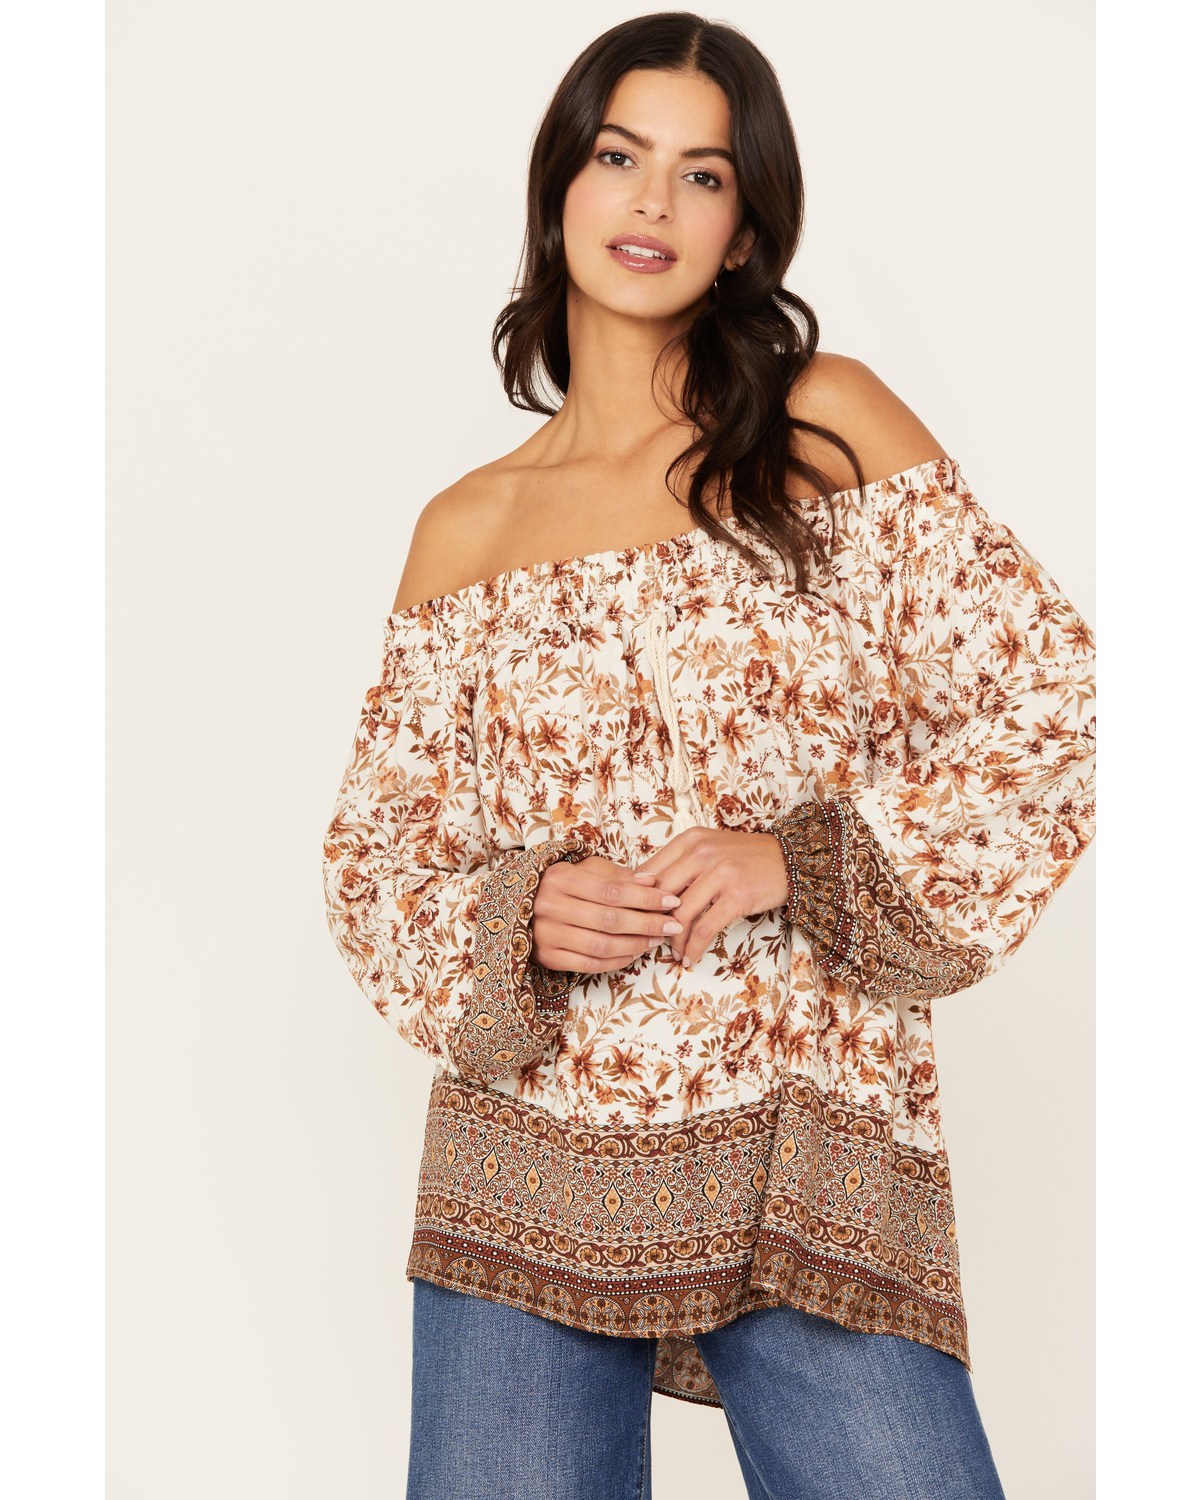 Wild Moss Women's Floral Border Peasant Top